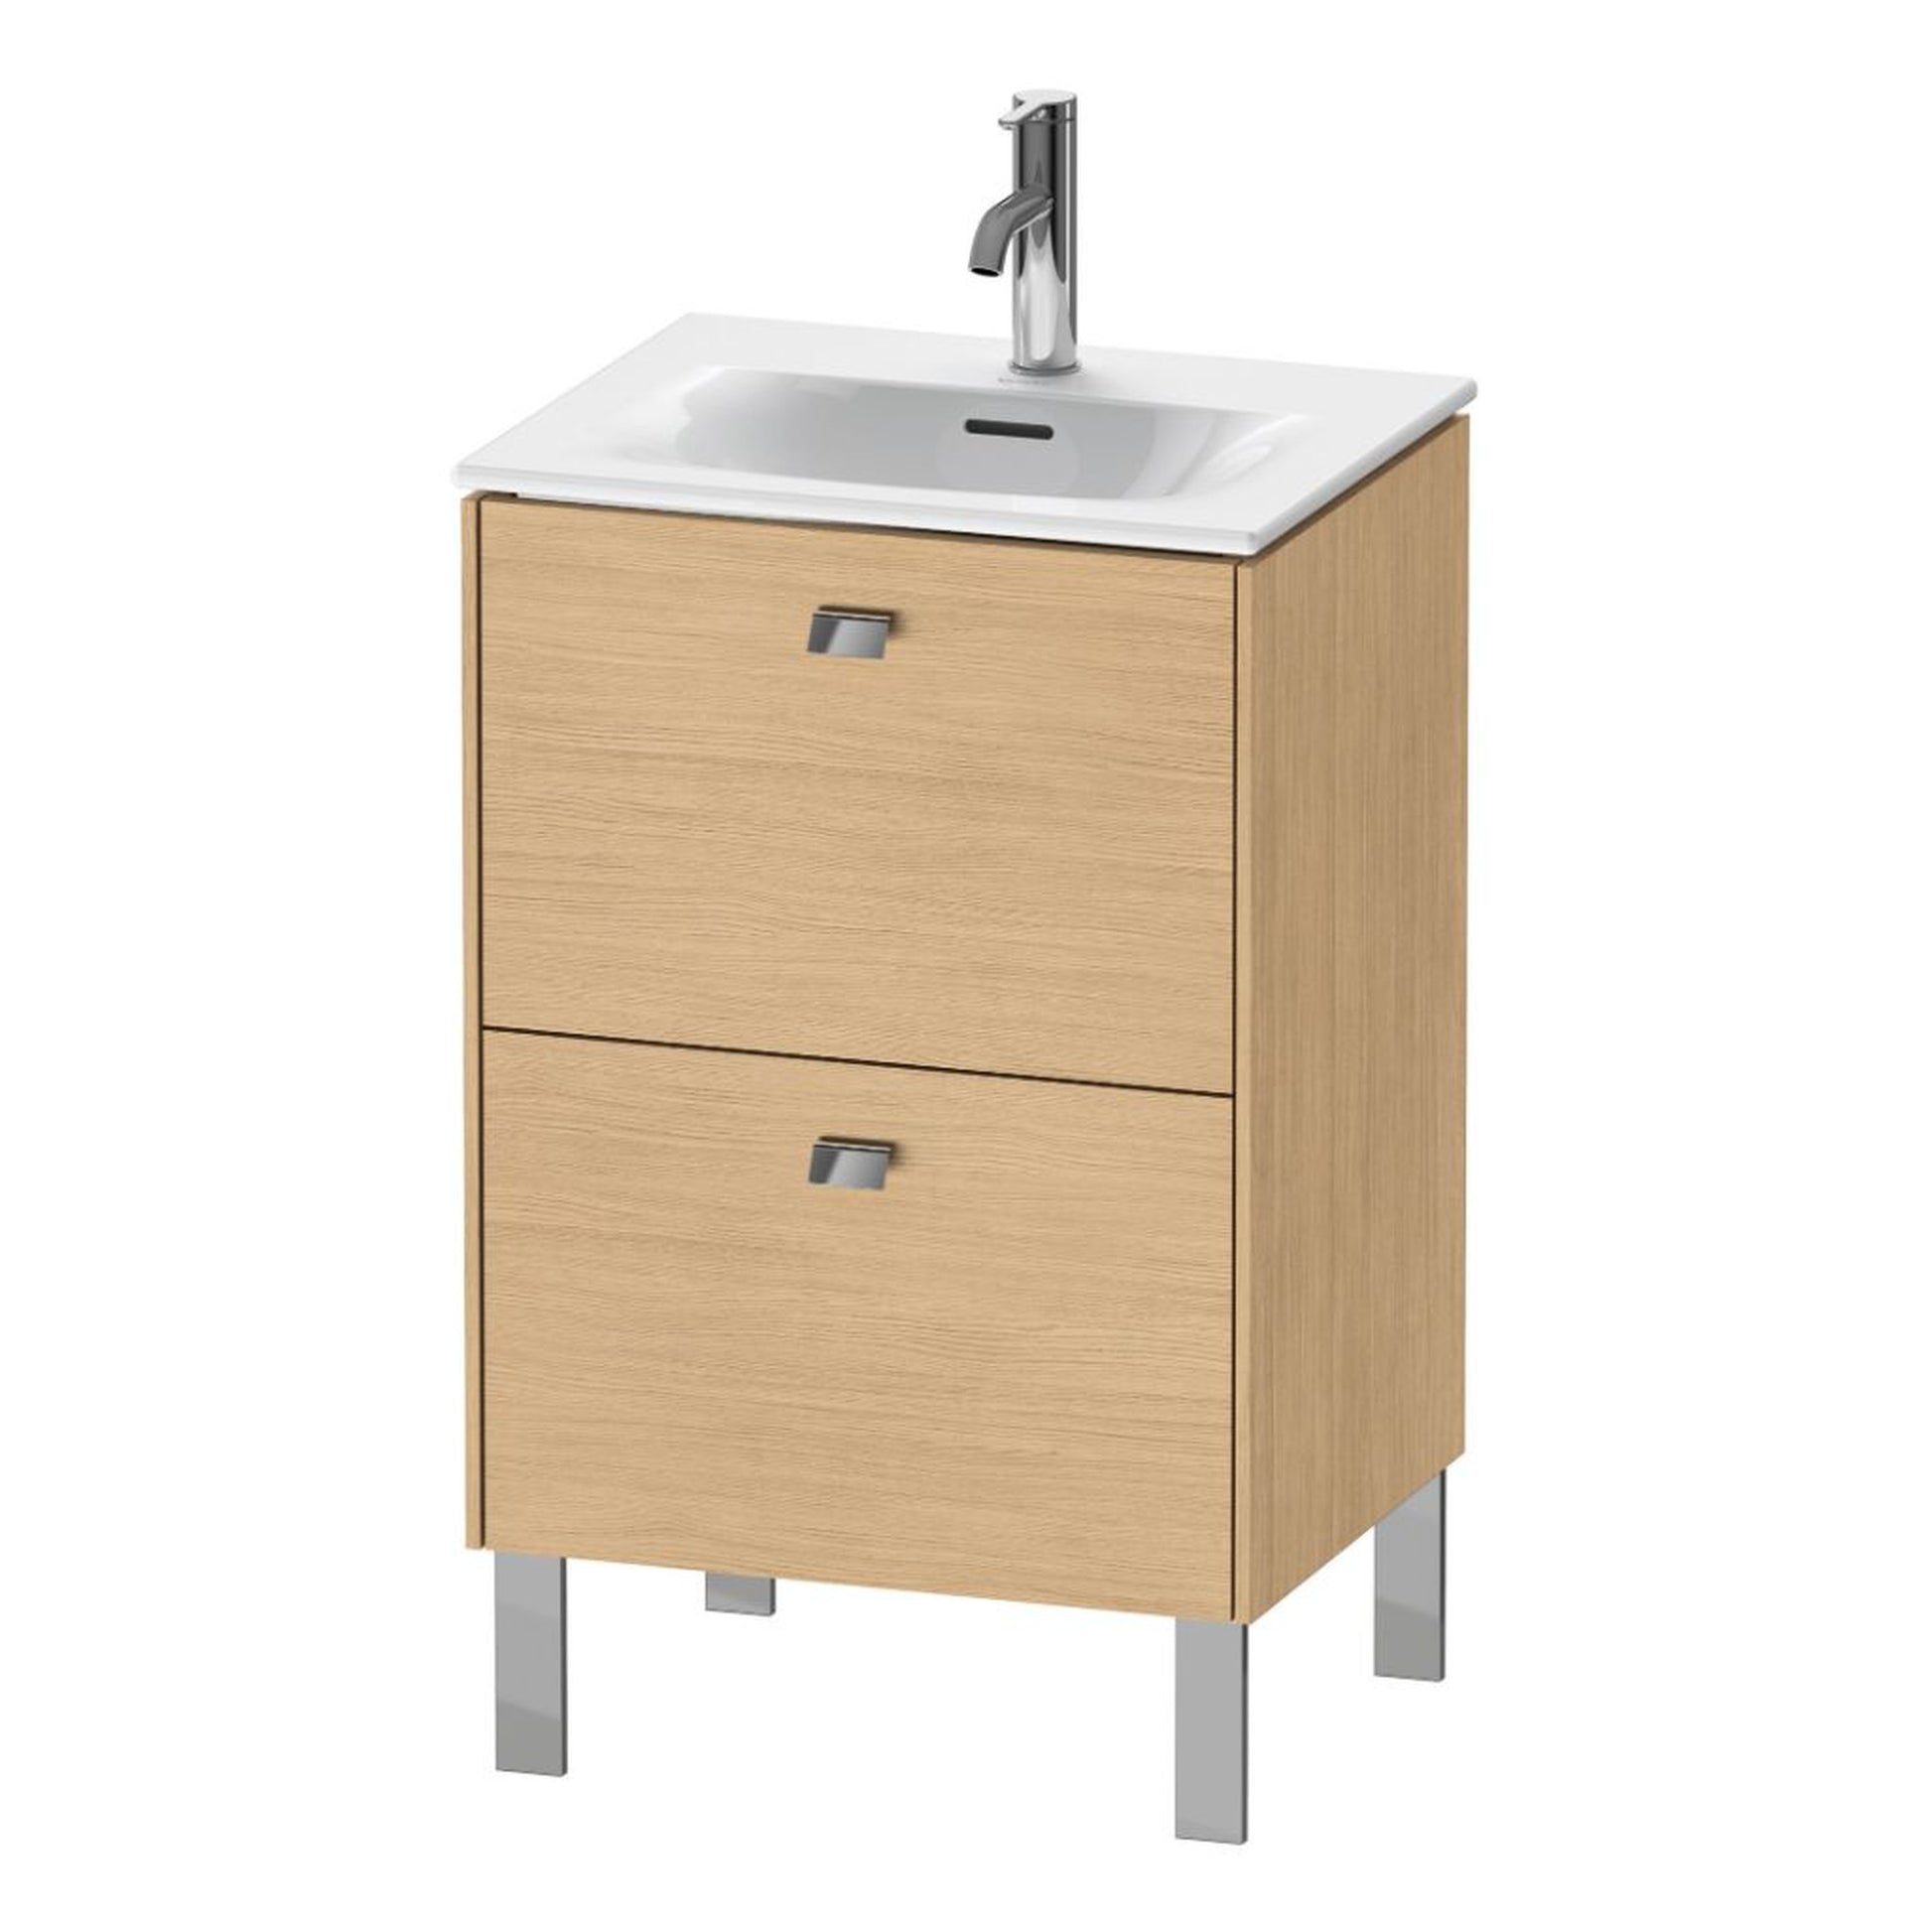 Duravit Brioso BR45090 20" x 27" x 16" Two Drawer Floor Standing Vanity Unit in Natural Oak and Chrome Handle